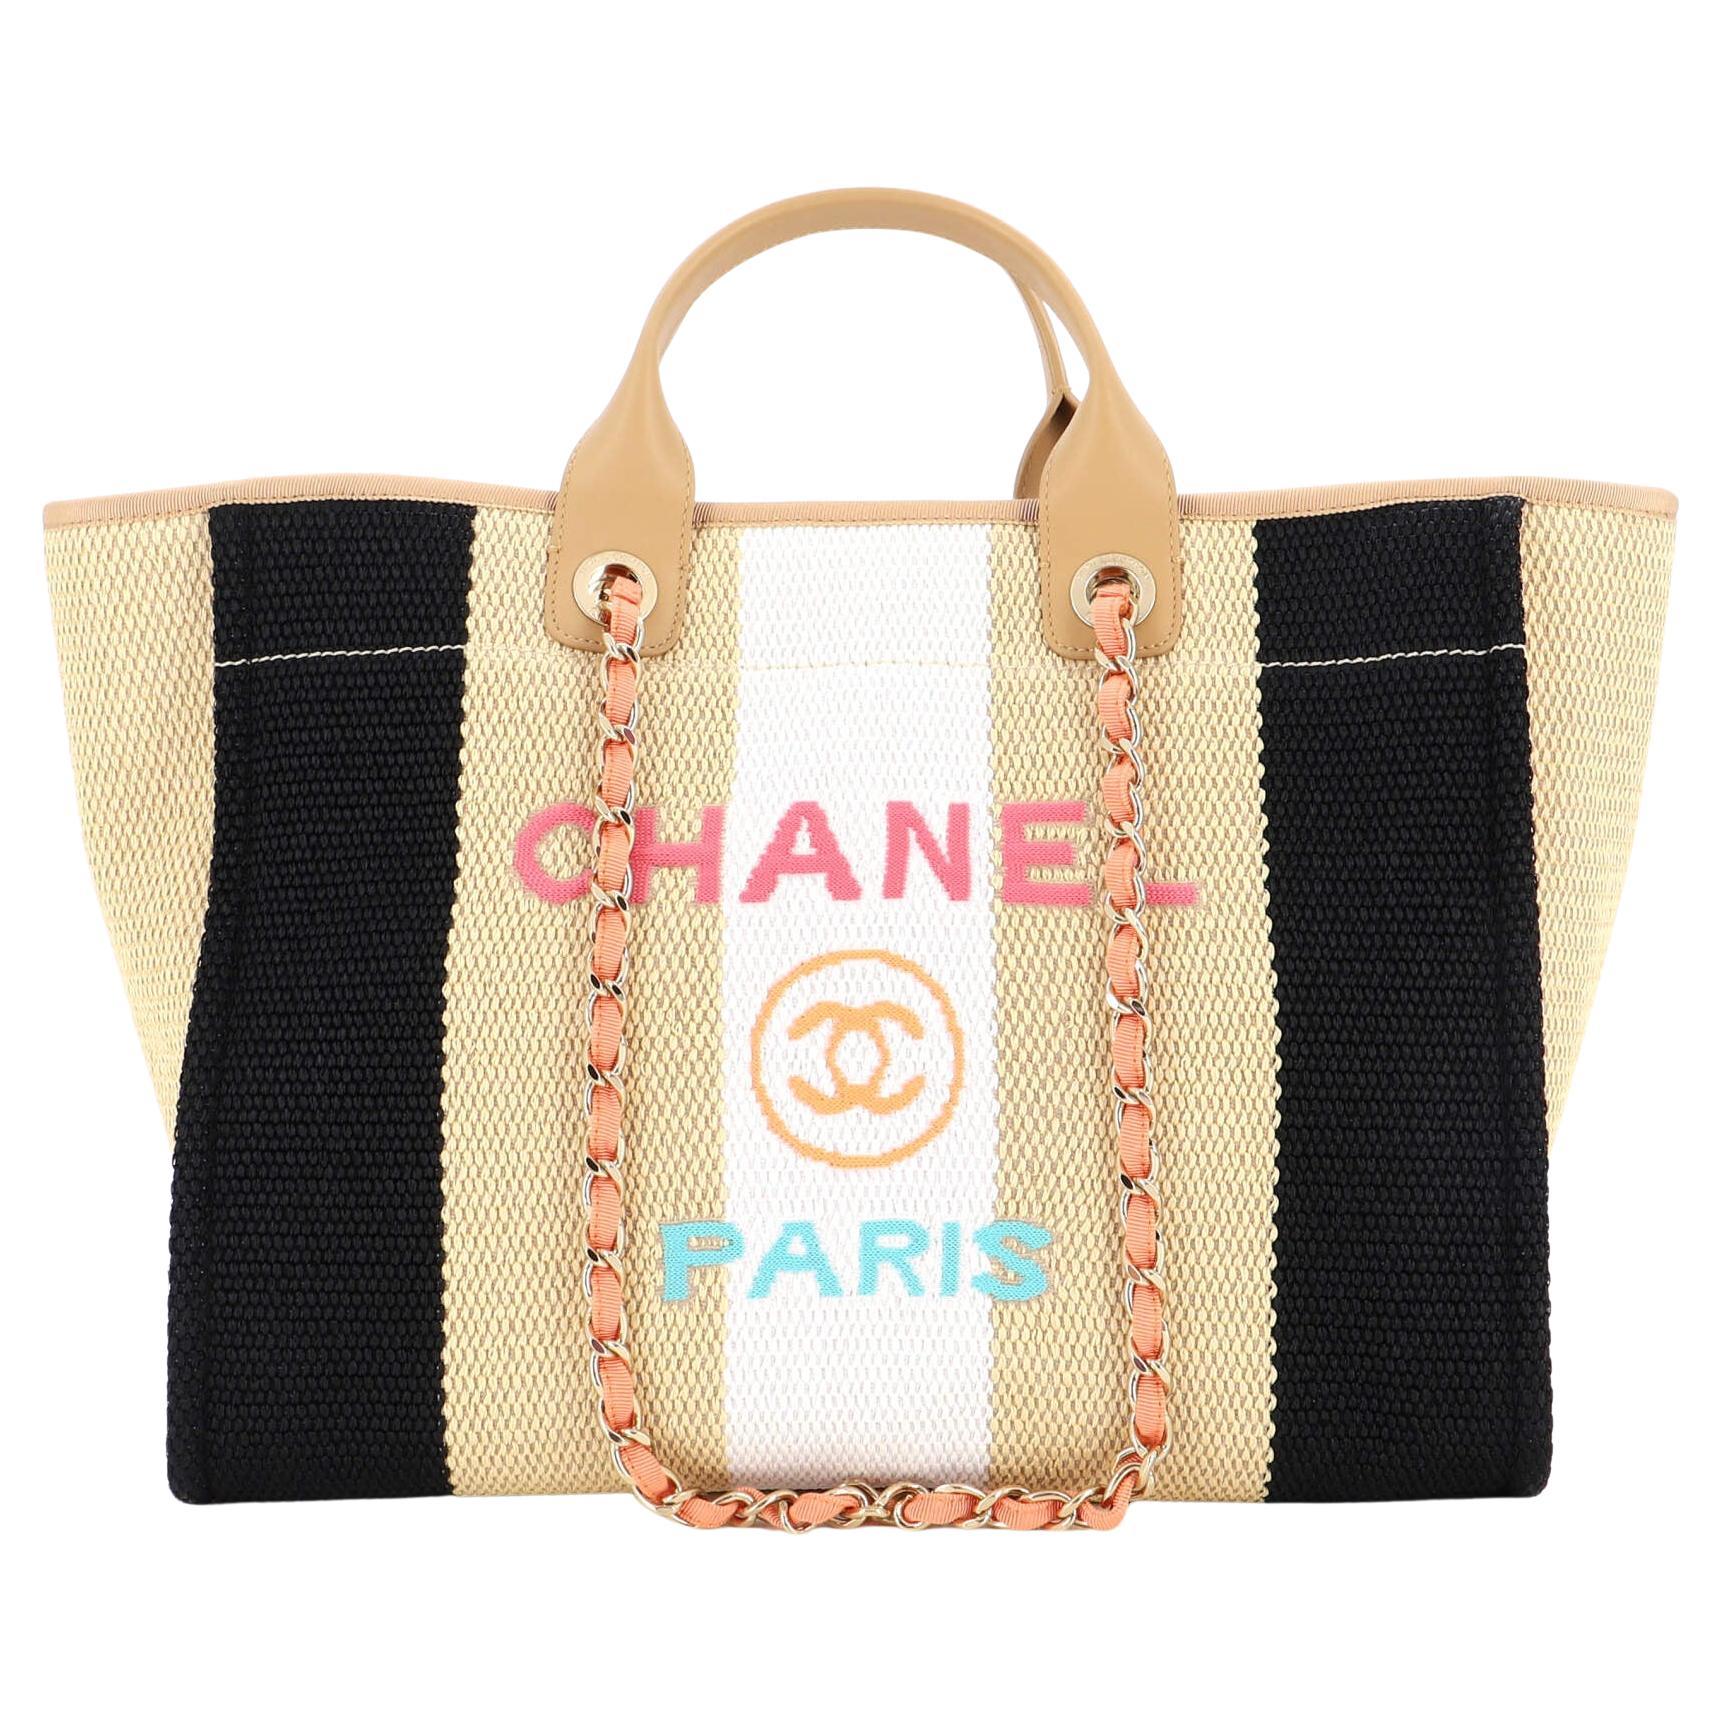 CHANEL Canvas Large Deauville Tote Blue 277776